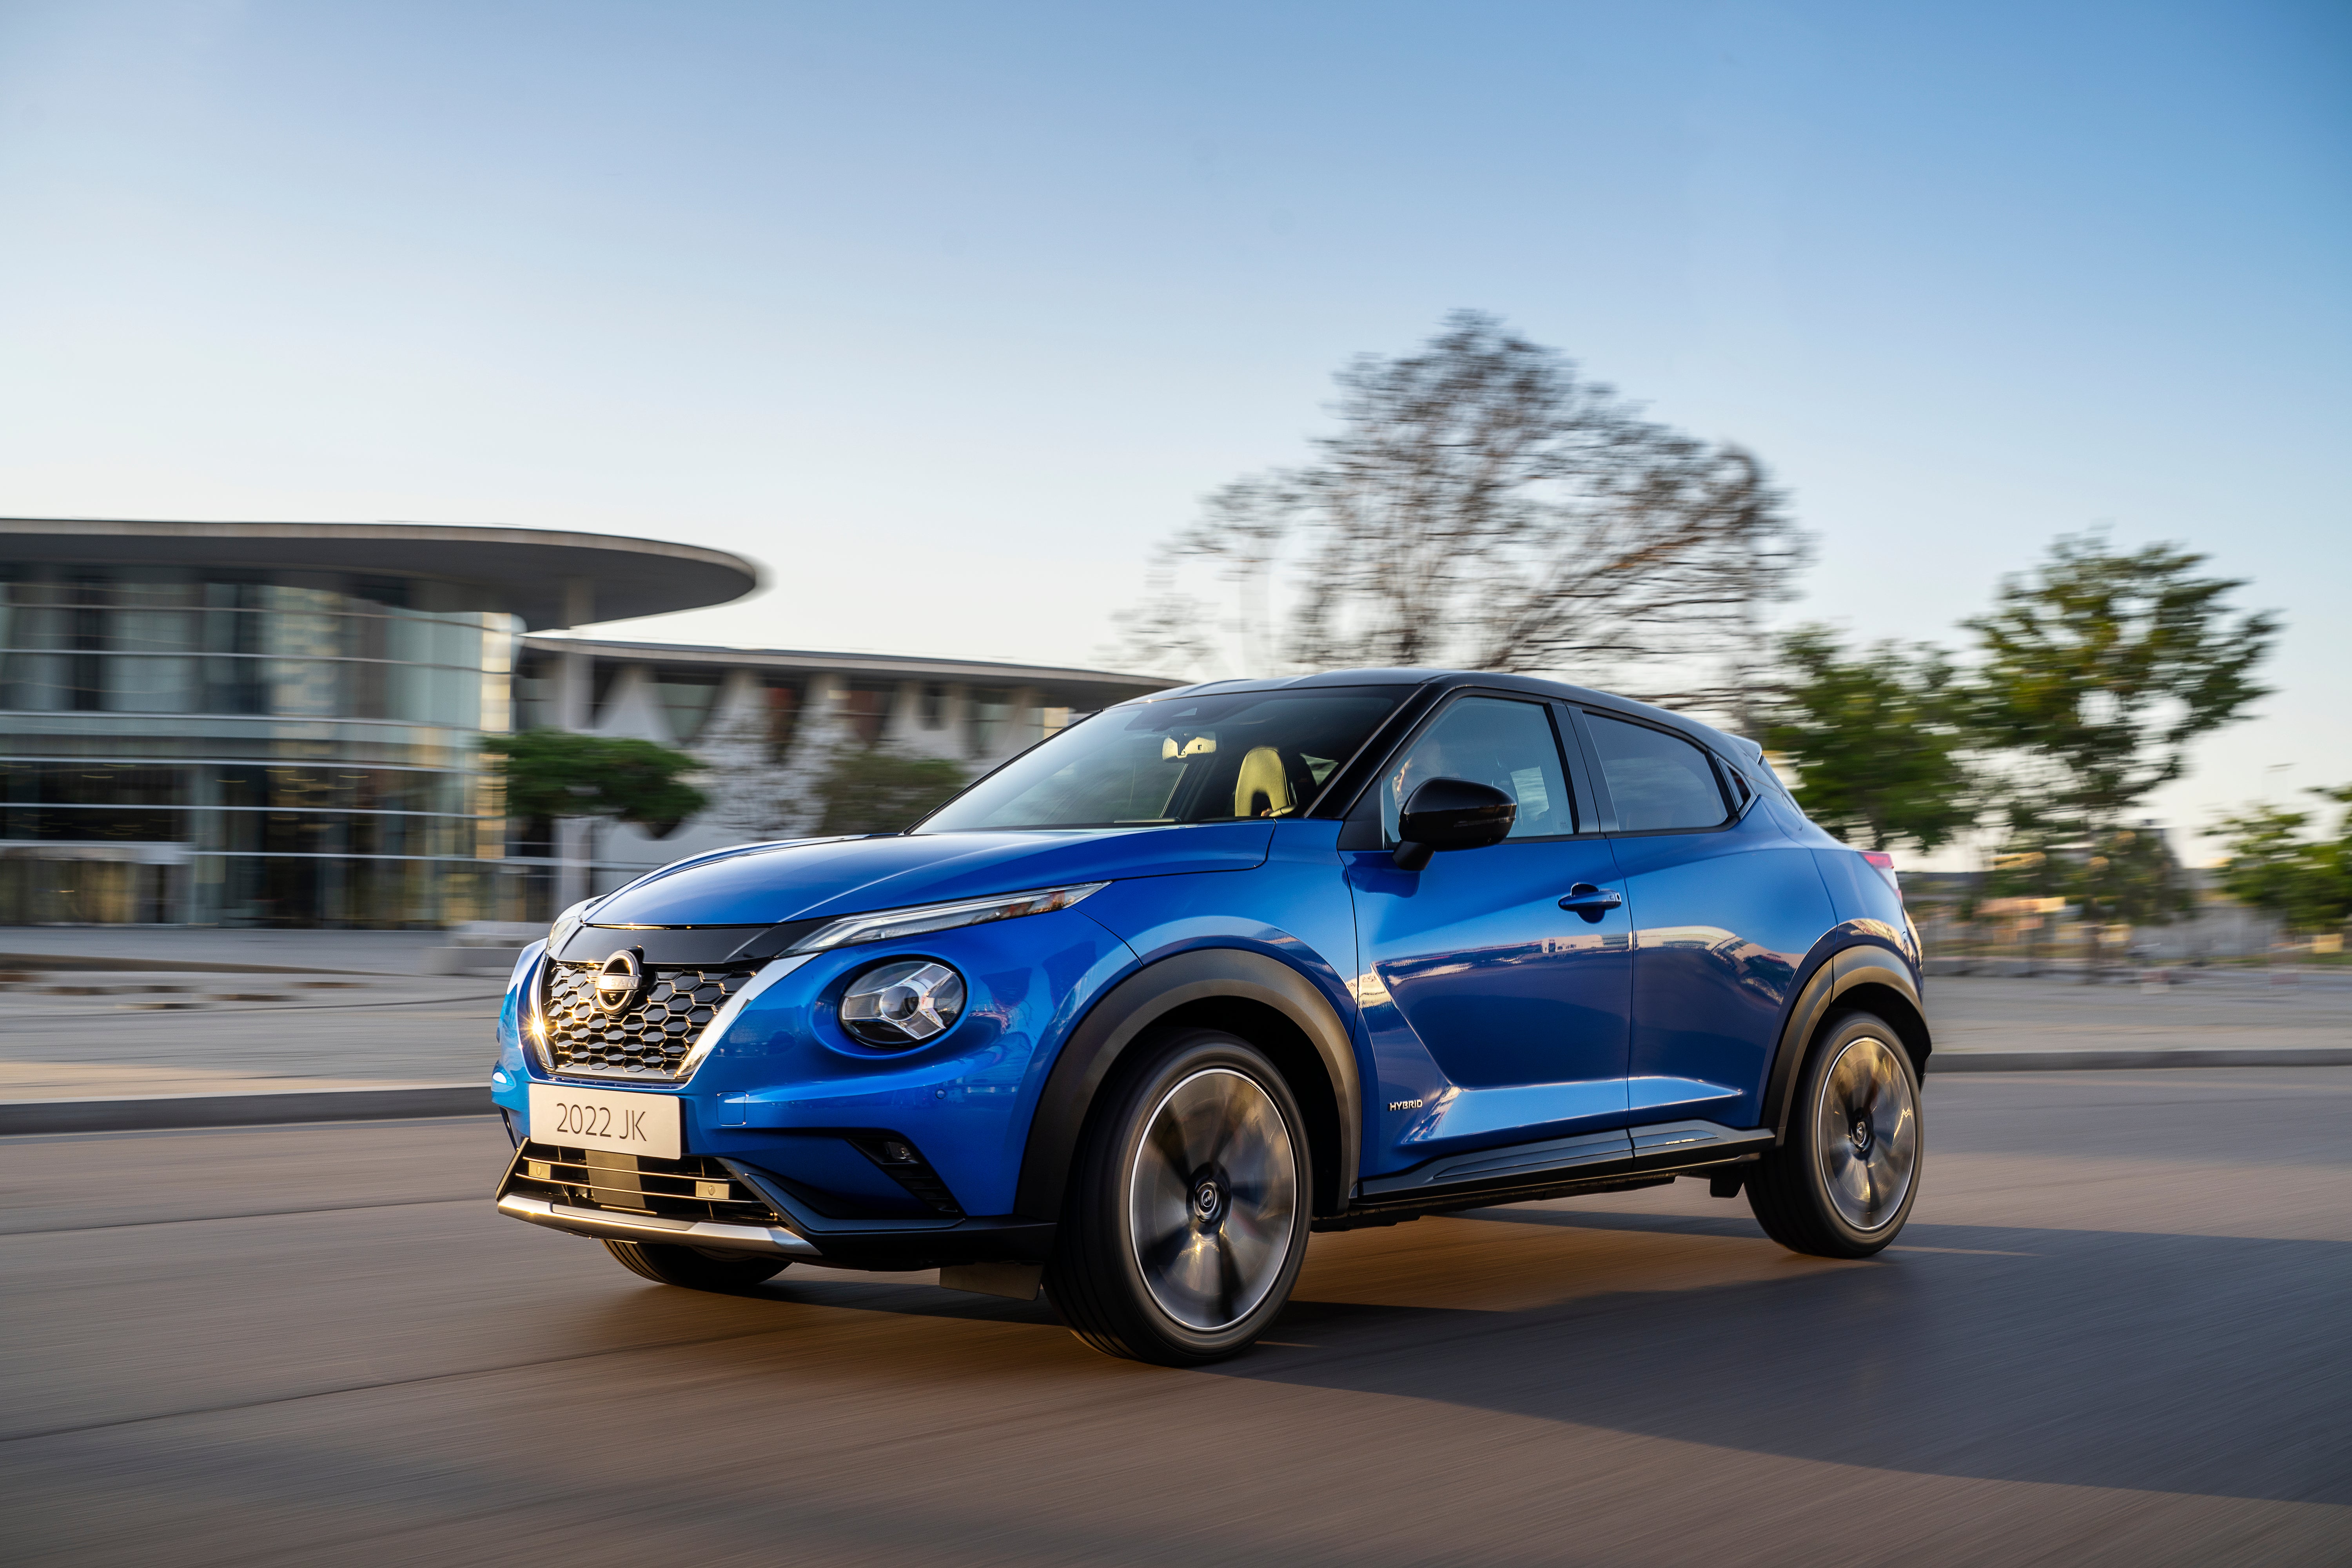 The insect-like Juke is designed, engineered and built in Britain